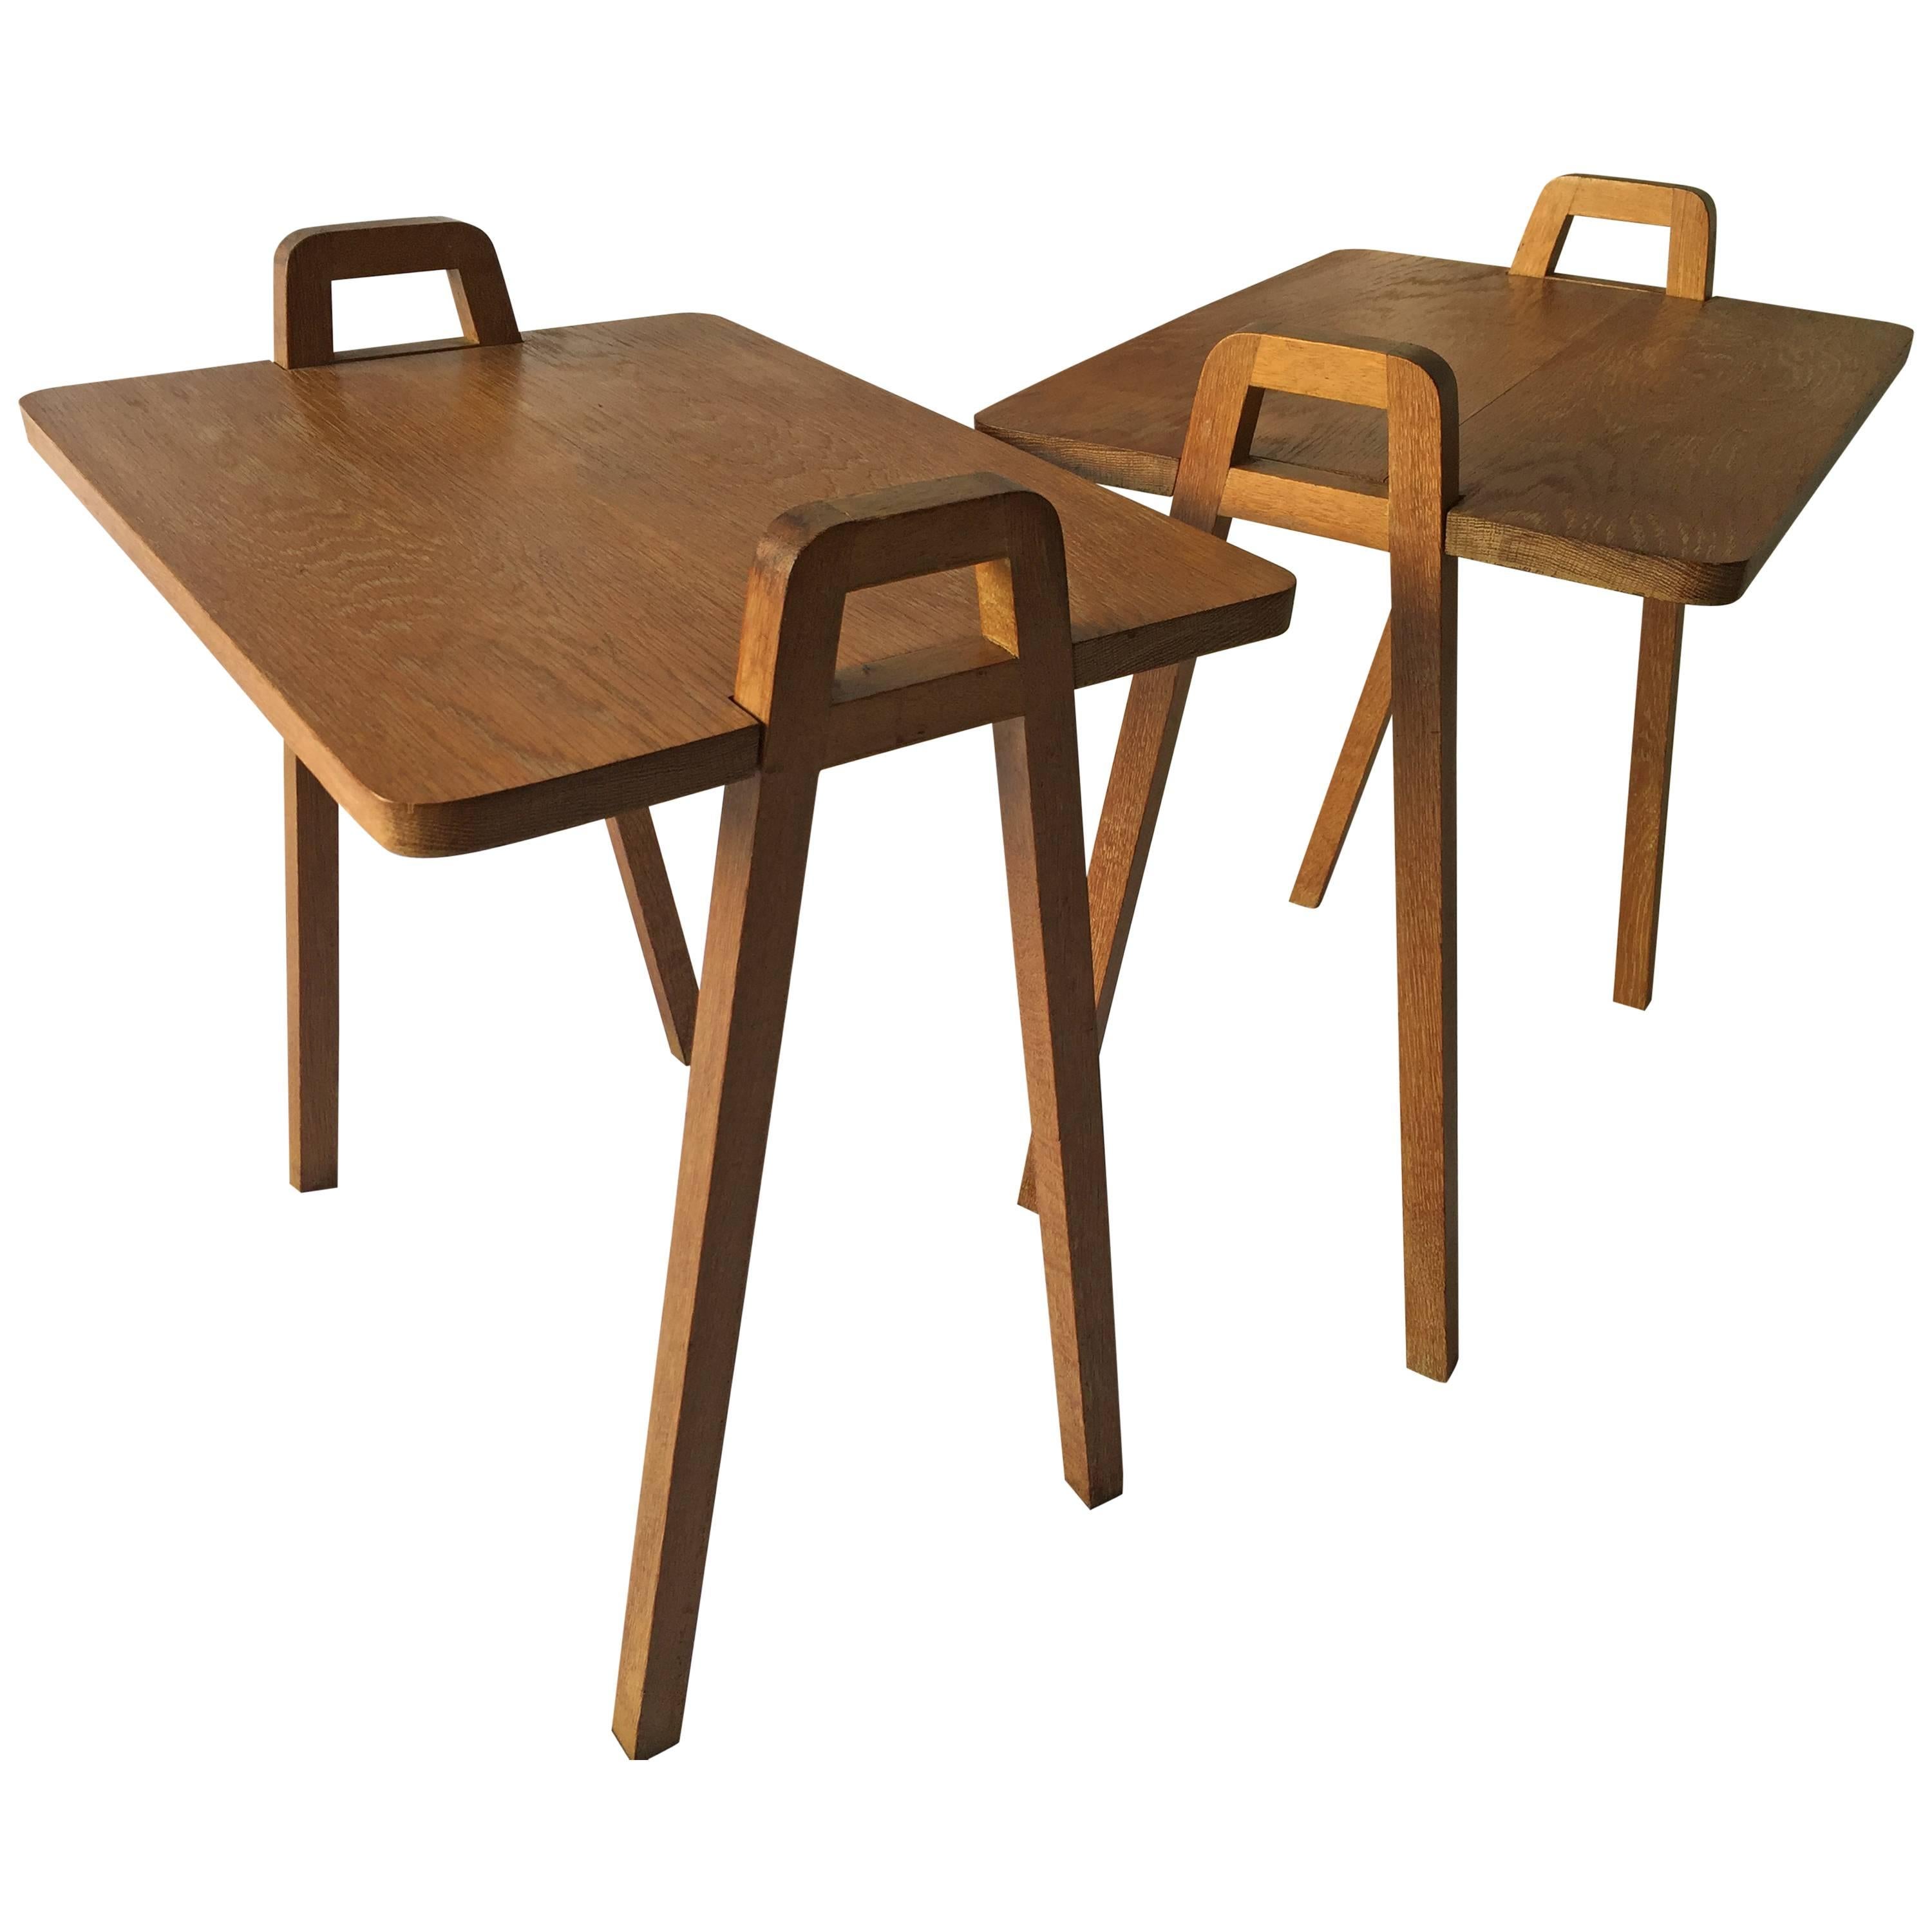 Pair of Mid-Century Unusual Oak Tray Style Tables with Compass Legs and Handles